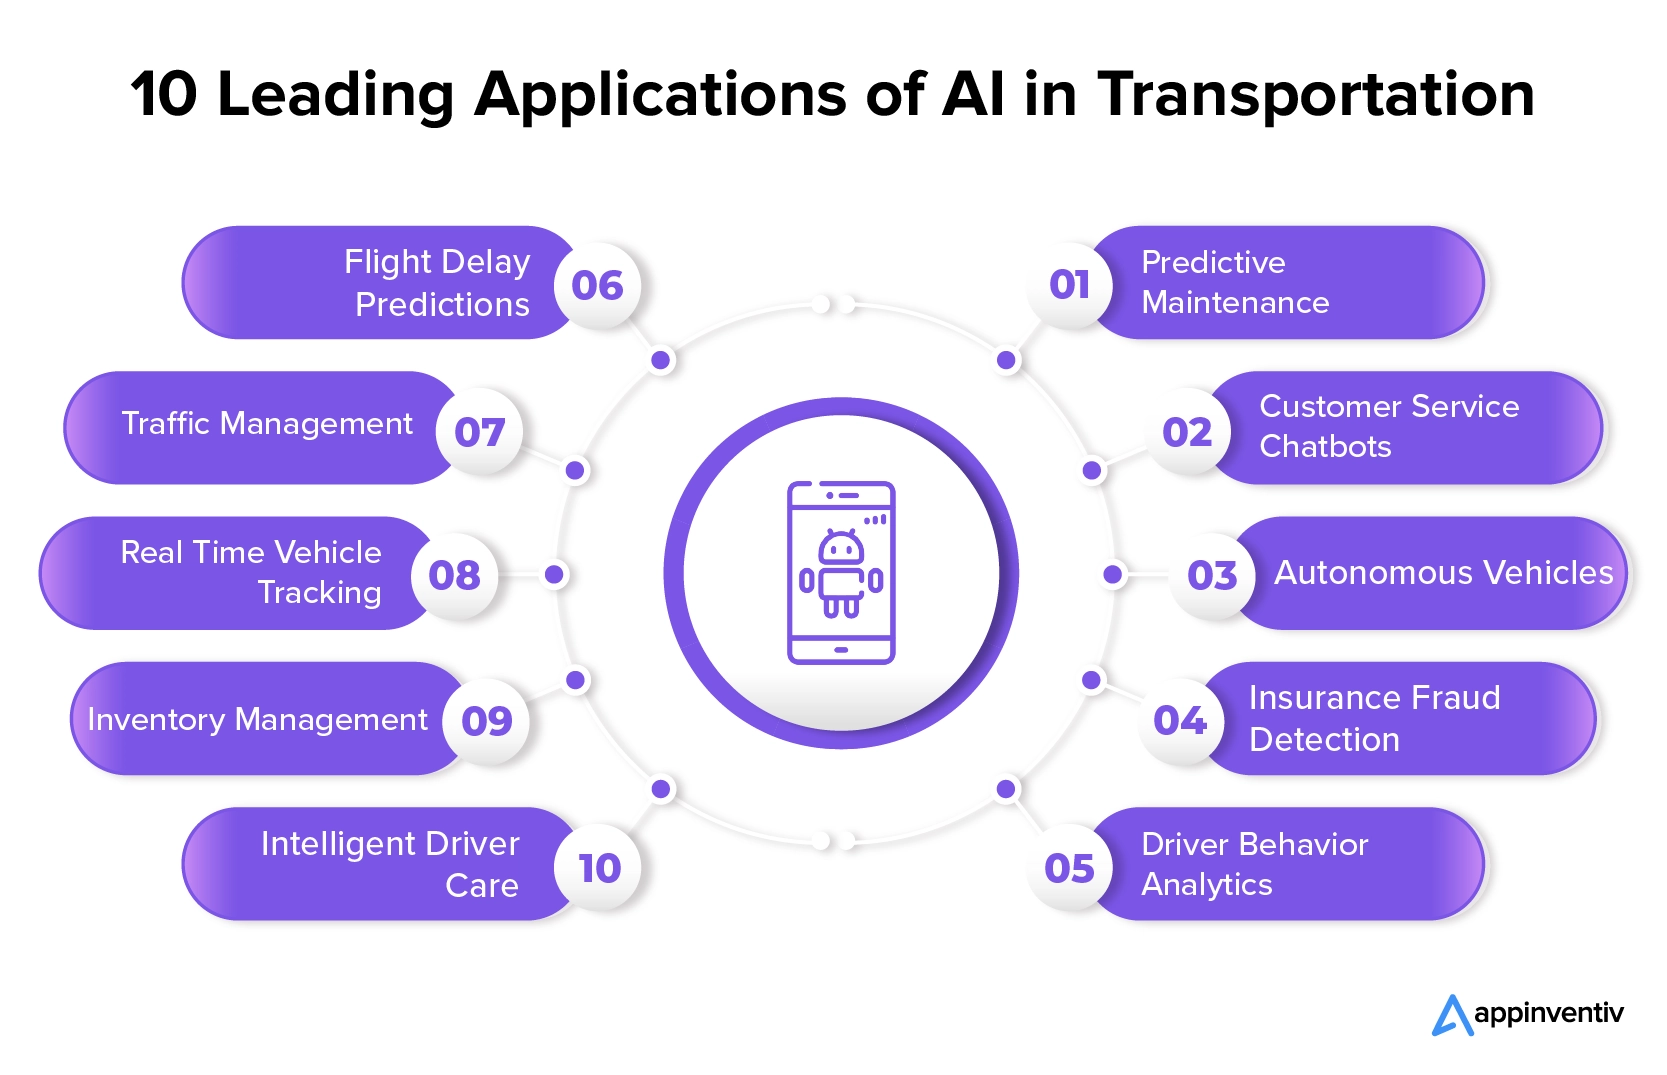 10 leading applications of AI in transportation